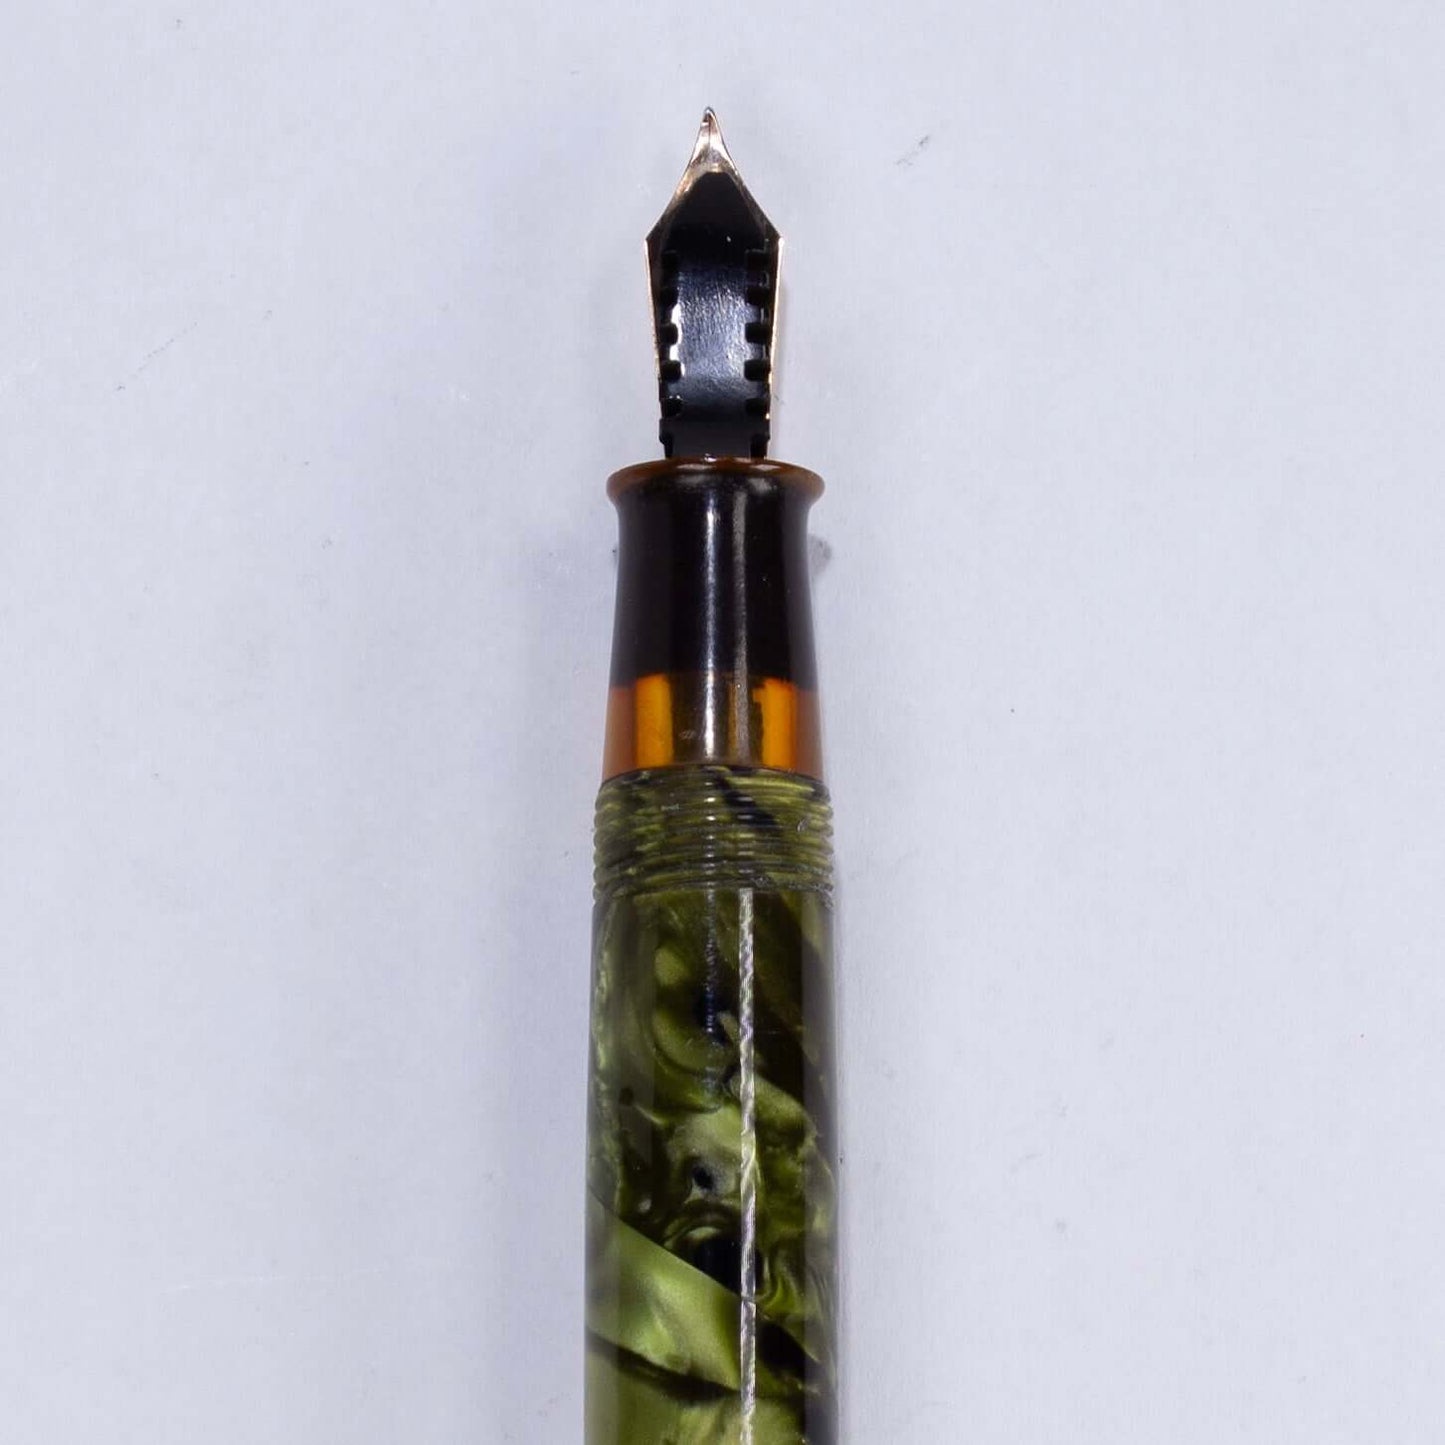 ${titleName/Type: Restored WASP Vacuum-fil Fountain Pen Manufacture Year: Circa 1930s Length: 5 Filling System: Lever Filler Color/Pattern: Green Birdseye, some refer to this color as Screaming Souls in Purgatory. Nib Type/Condition and remarks: 12K Gold